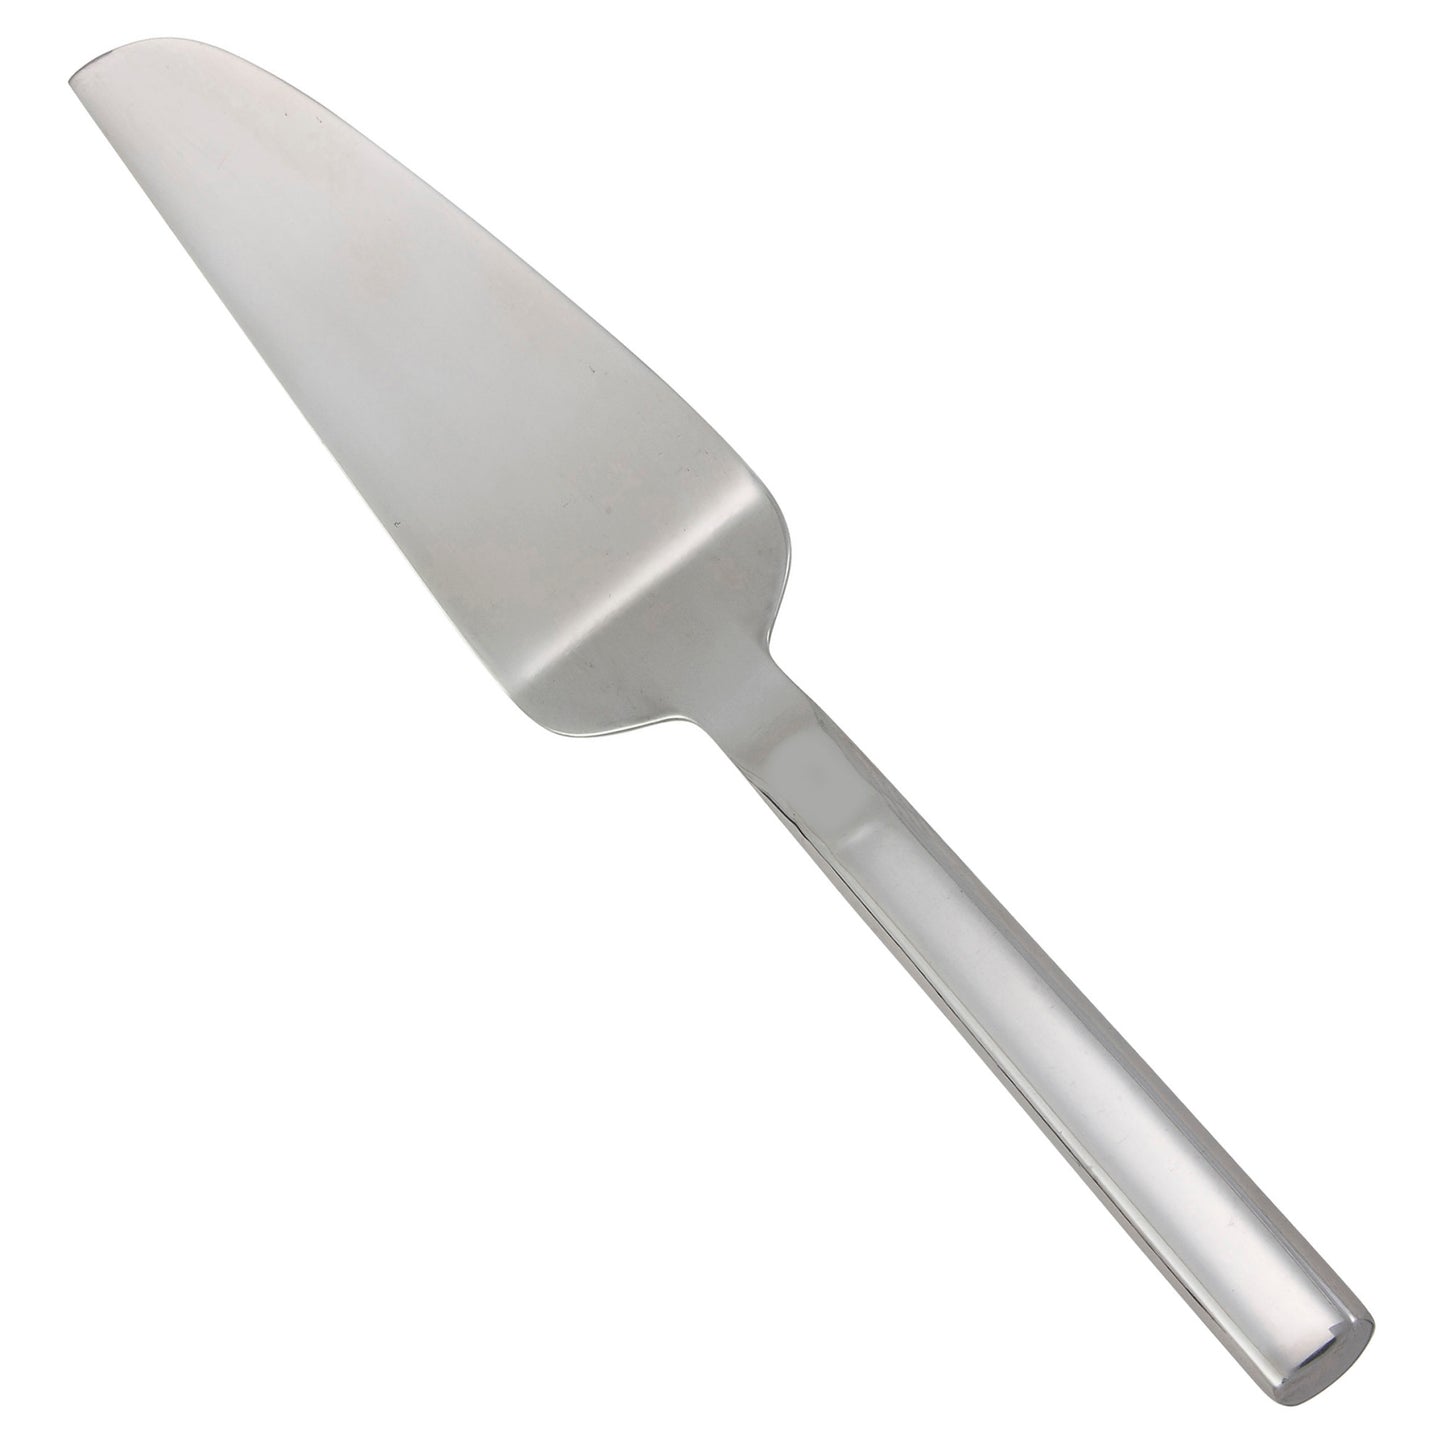 11" Pie Server, Hollow Handle, Stainless Steel